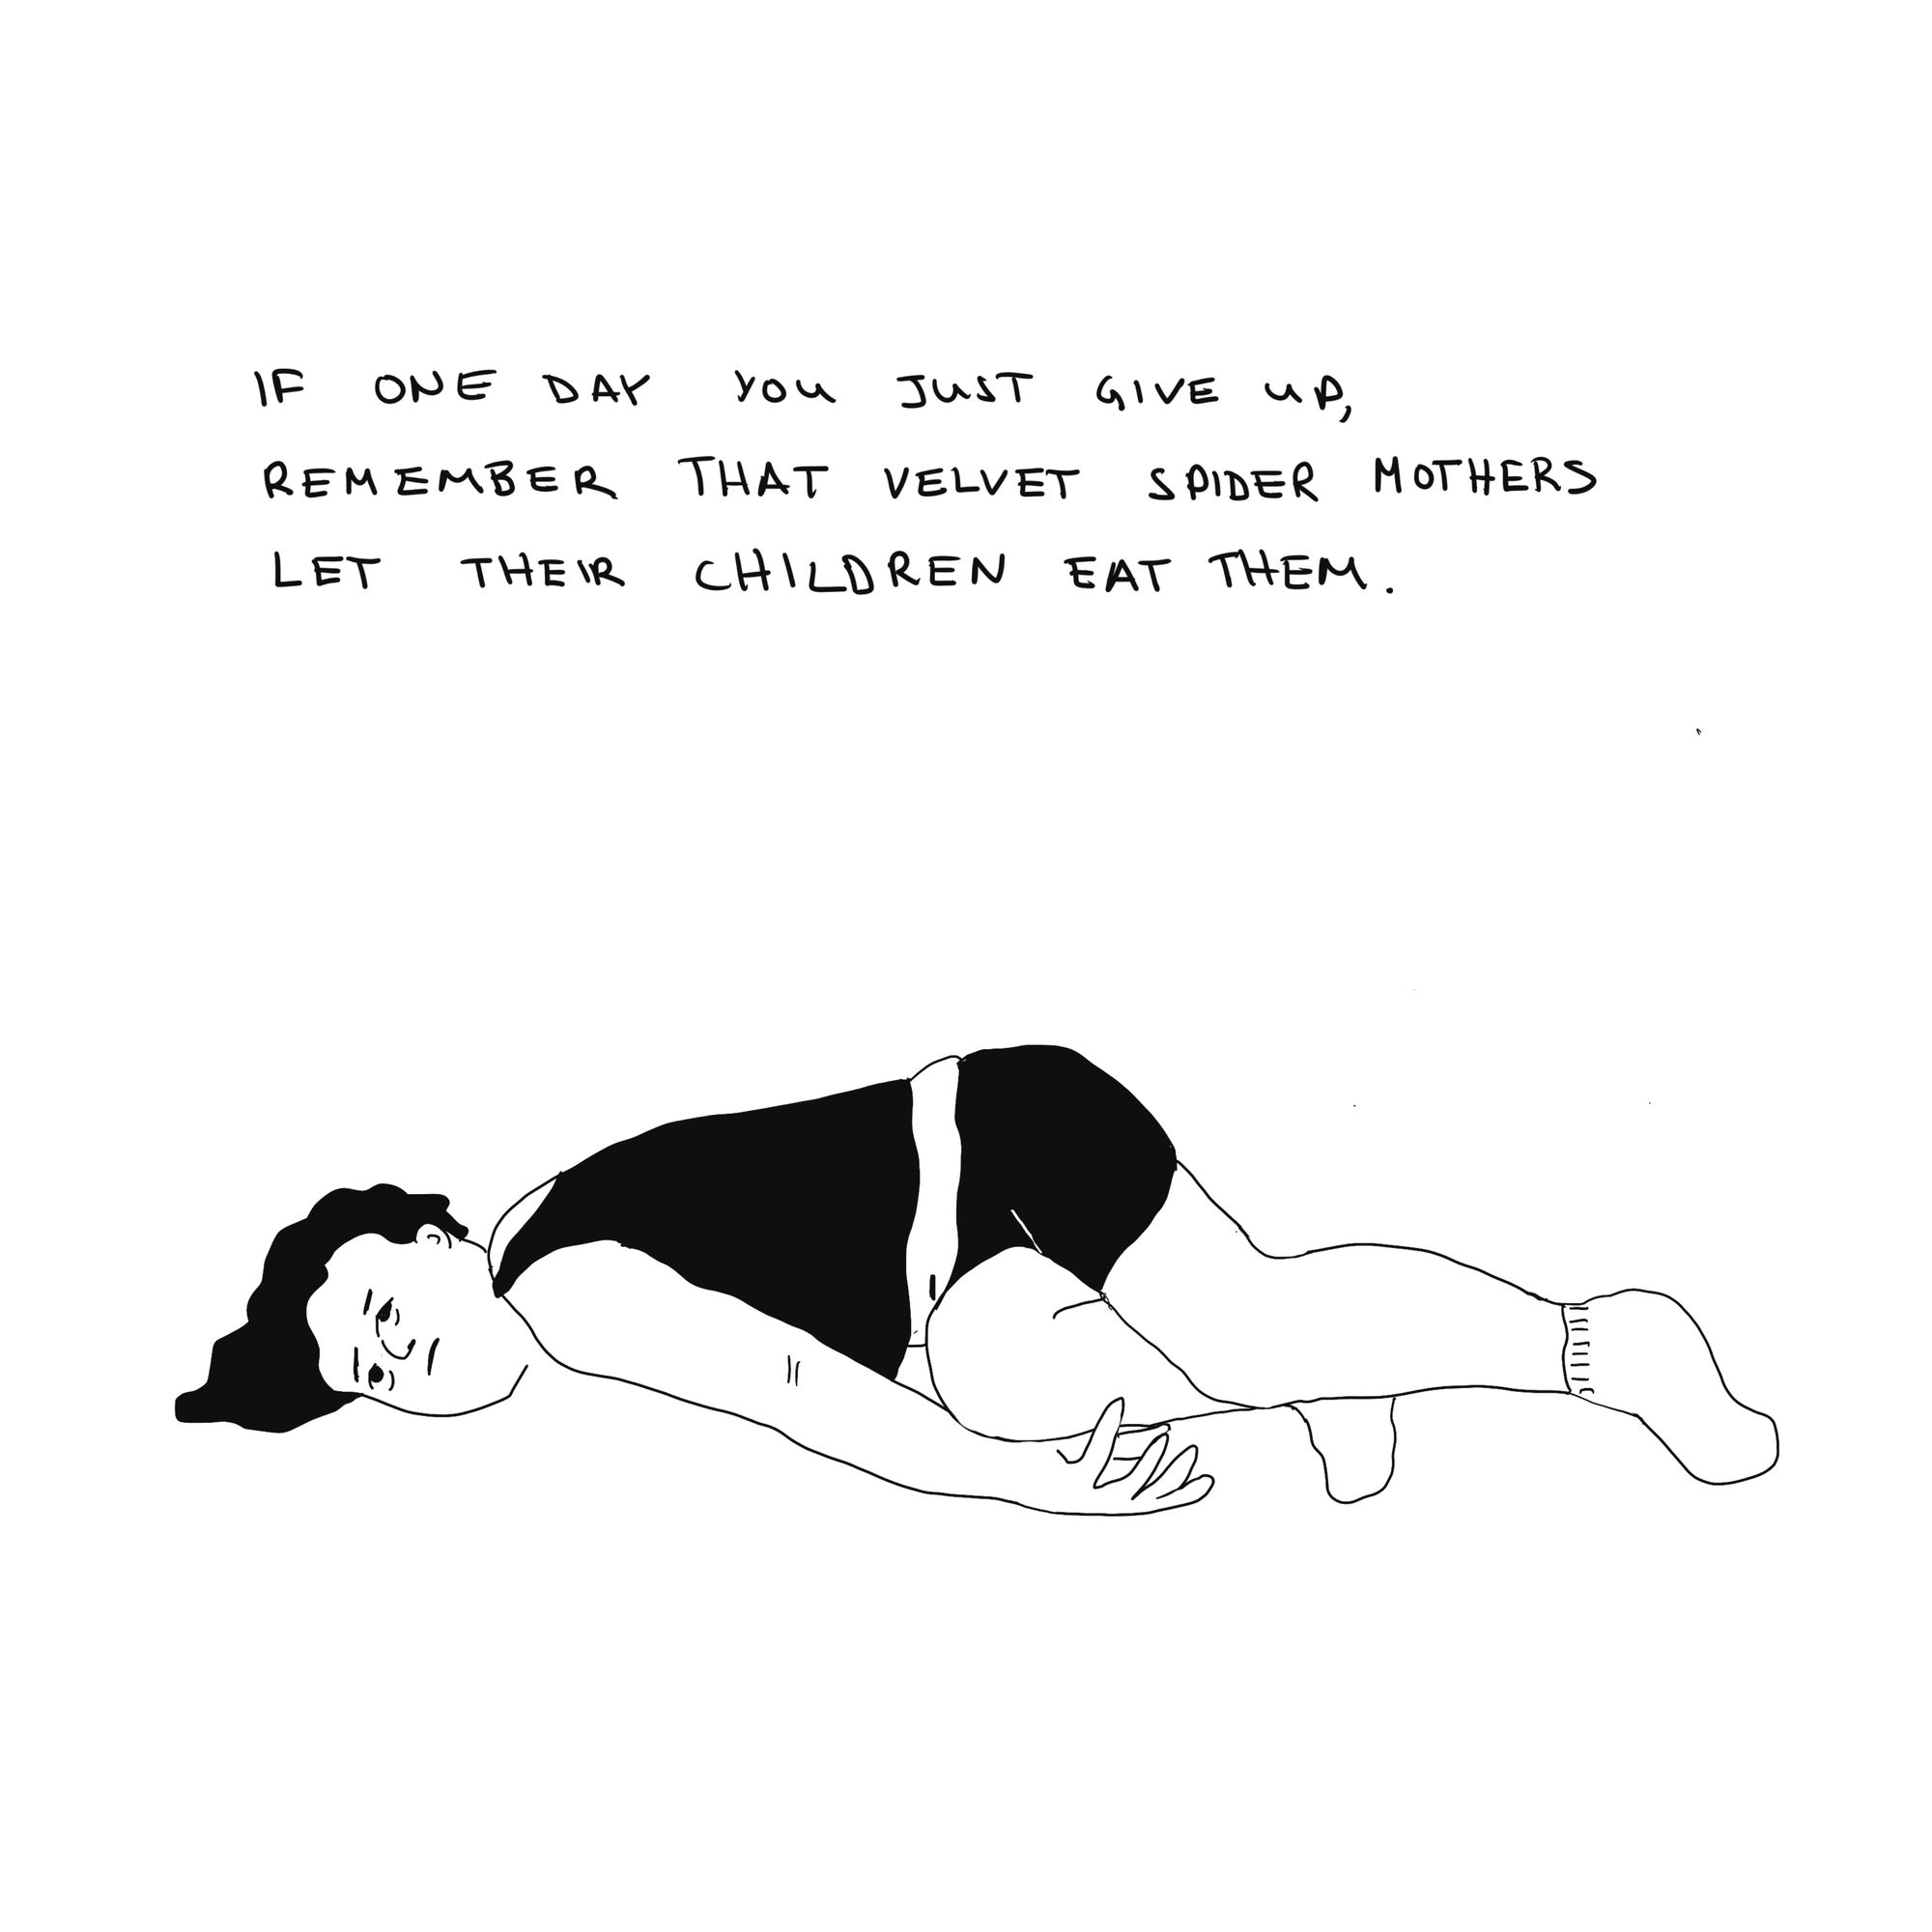 Black and white illustration showing woman laying on floor with text "If one day you just give up, remember than velvet spider mothers let their children eat them."